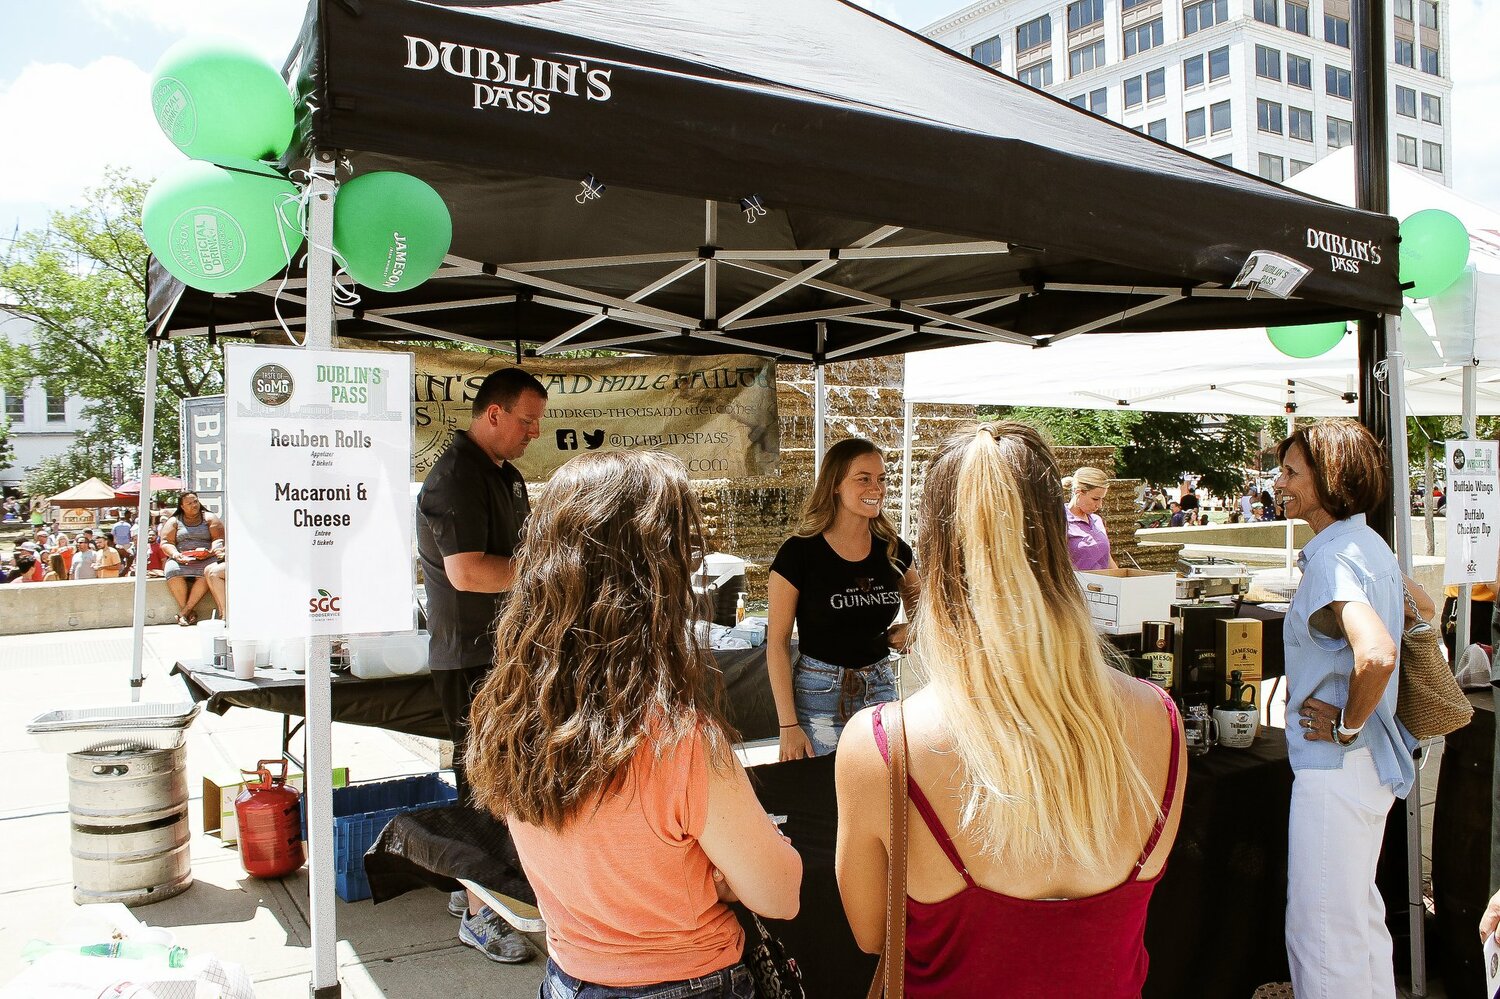 Dublin’s Pass is among restaurants expected to appear at Saturday’s Taste of SoMo in downtown Springfield.